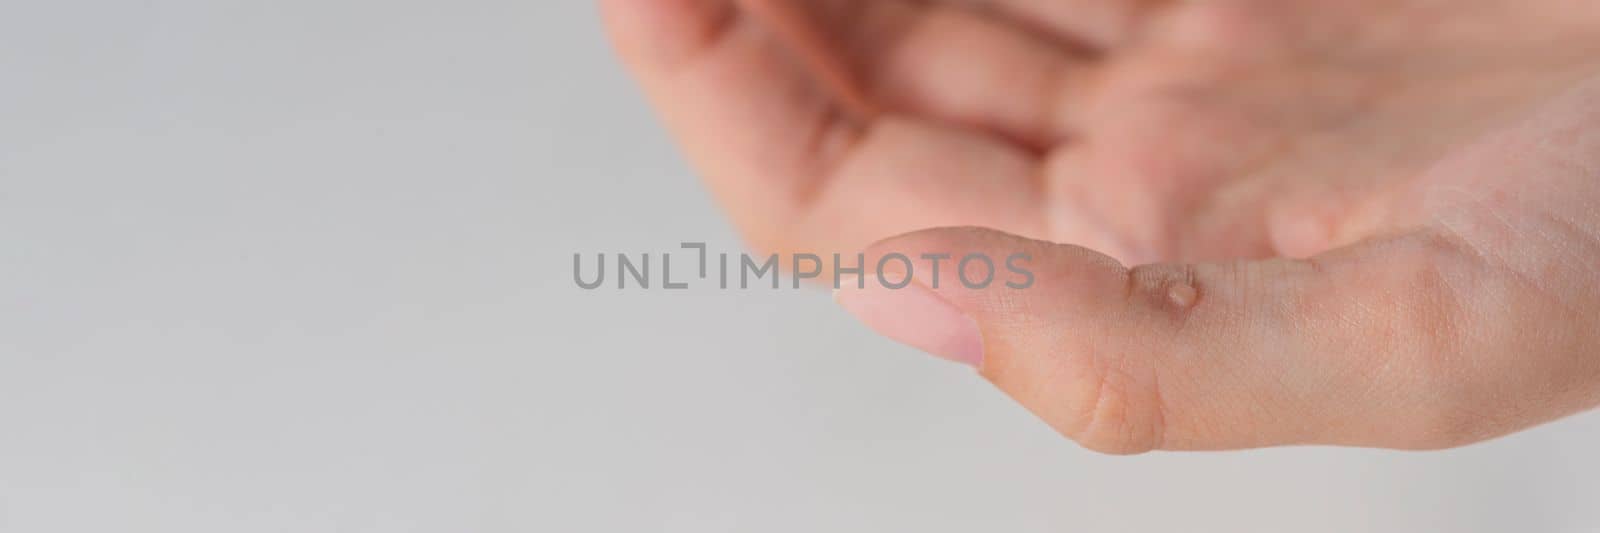 Wart on hand. The concept of treating warts and other skin defects. Close-up of a wart on a finger, a benign growth on human skin. by SERSOL